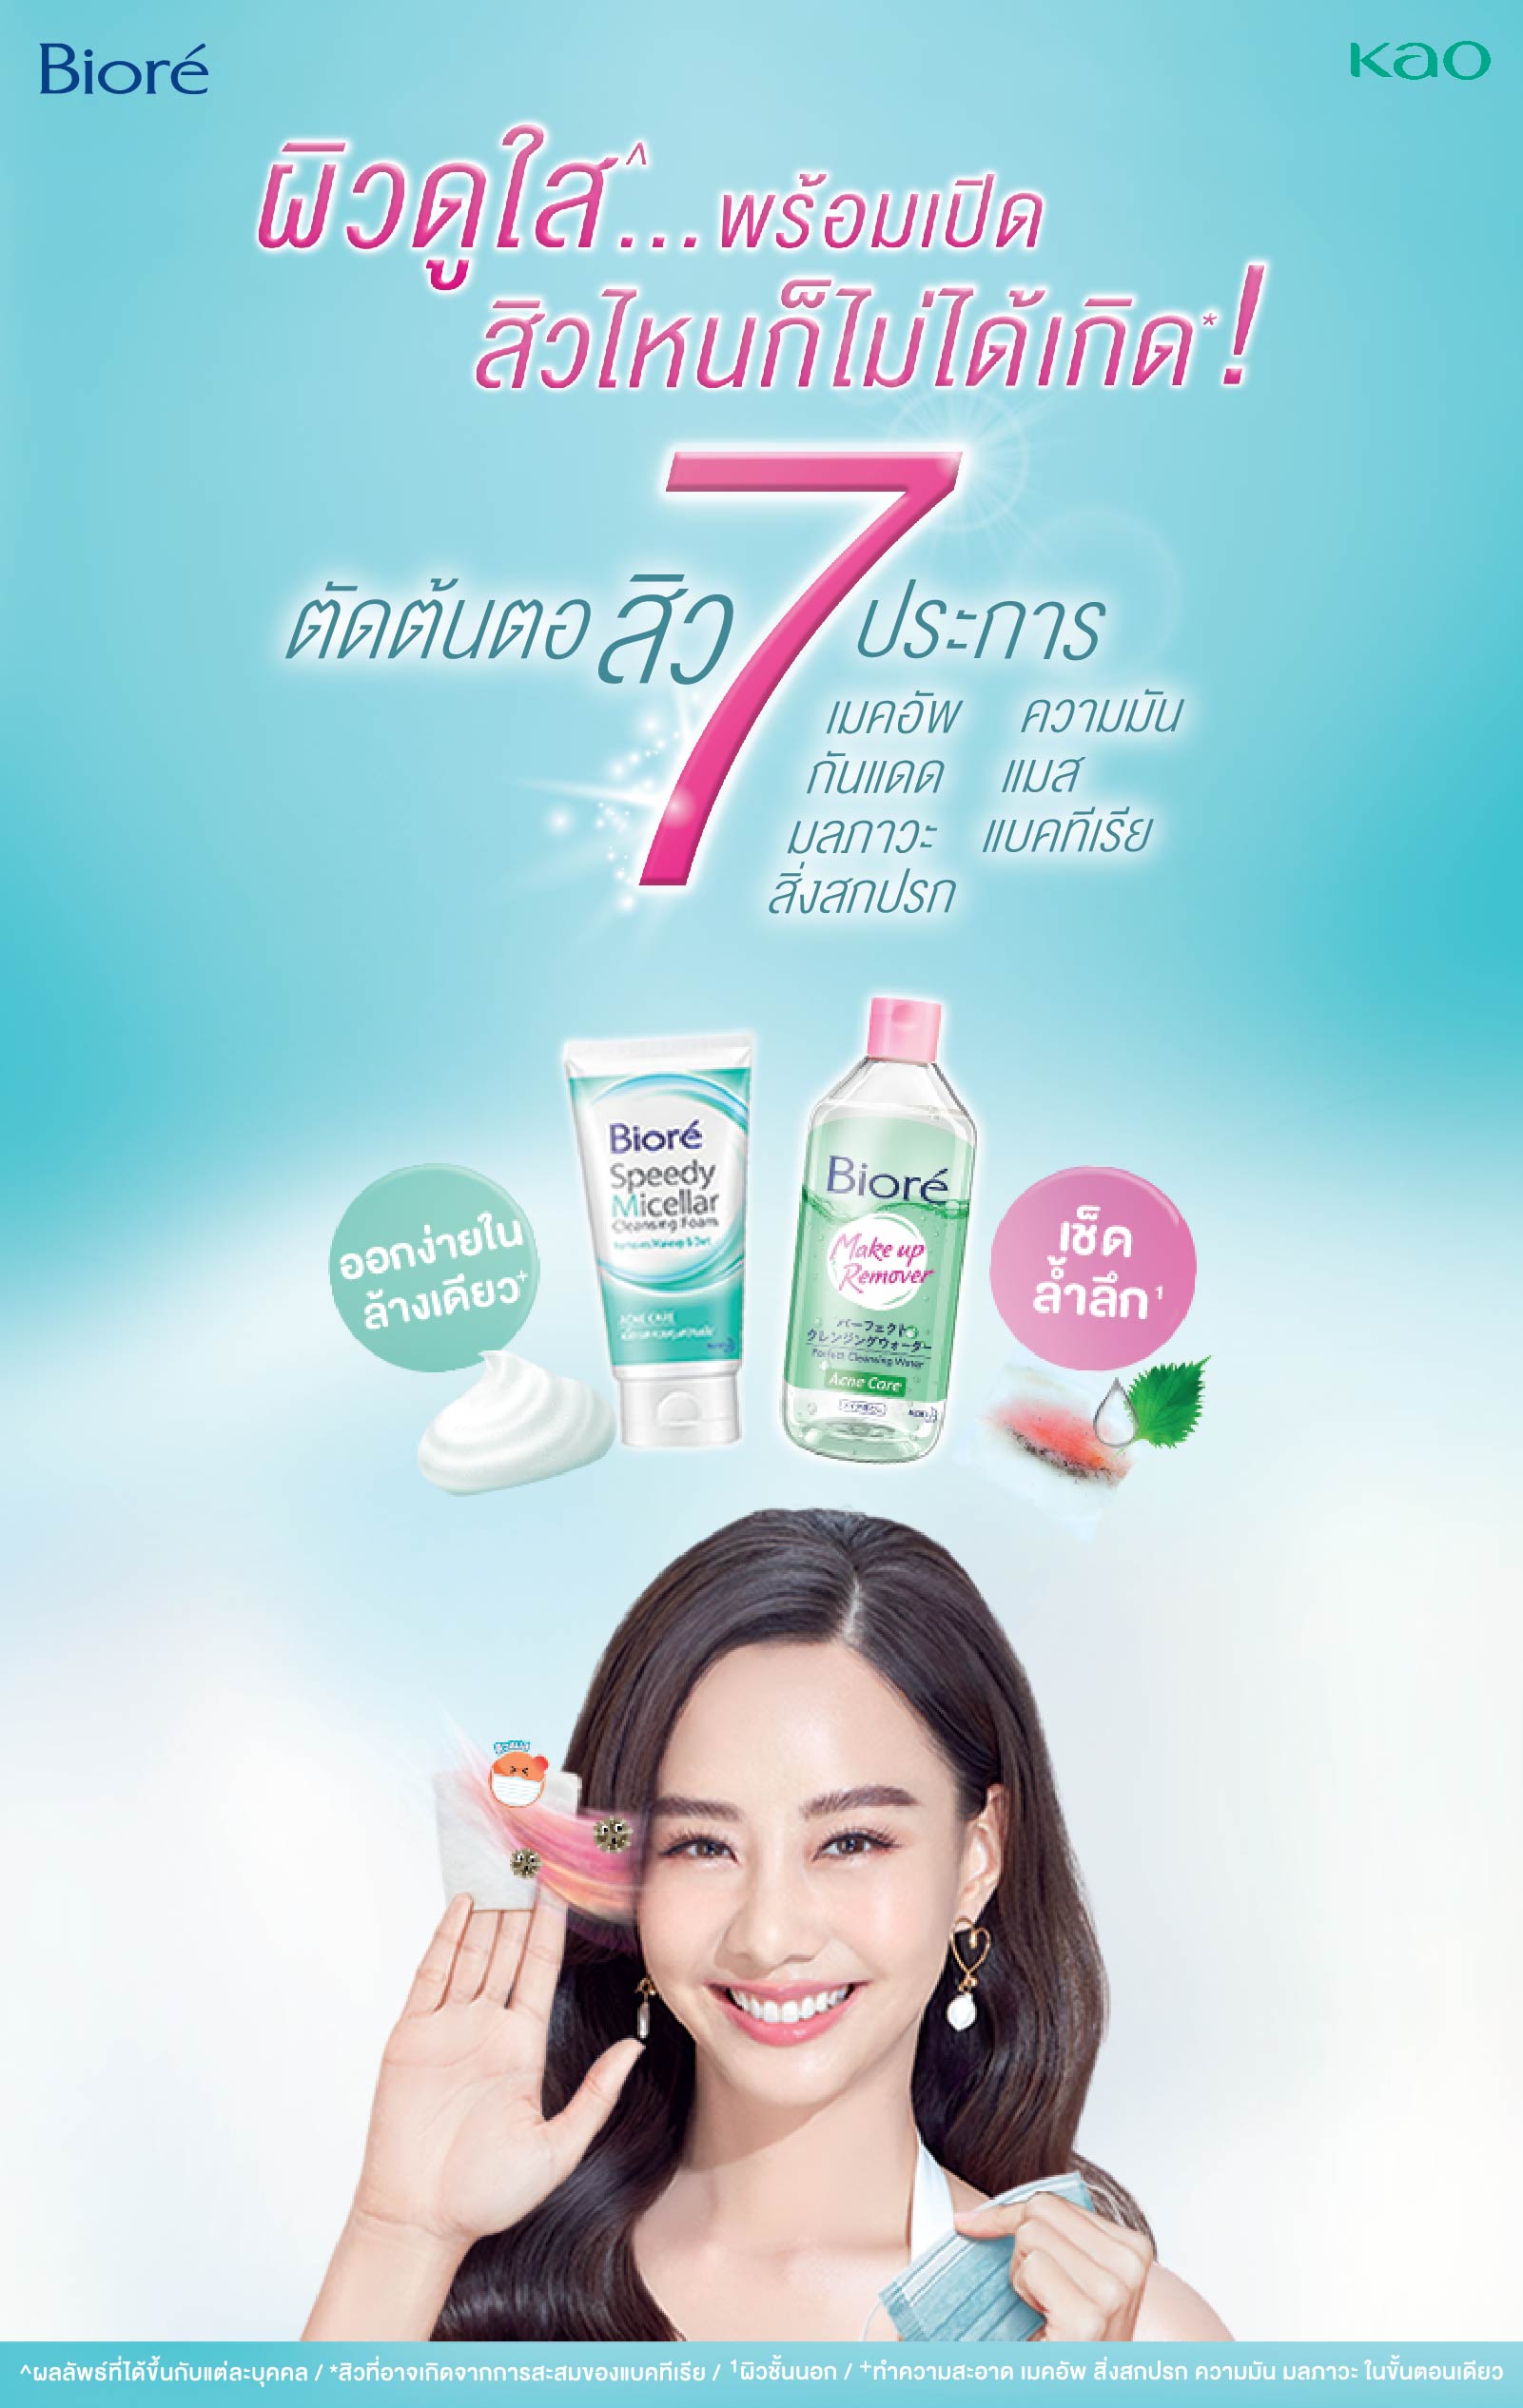 Biore Acne Cleansing Family